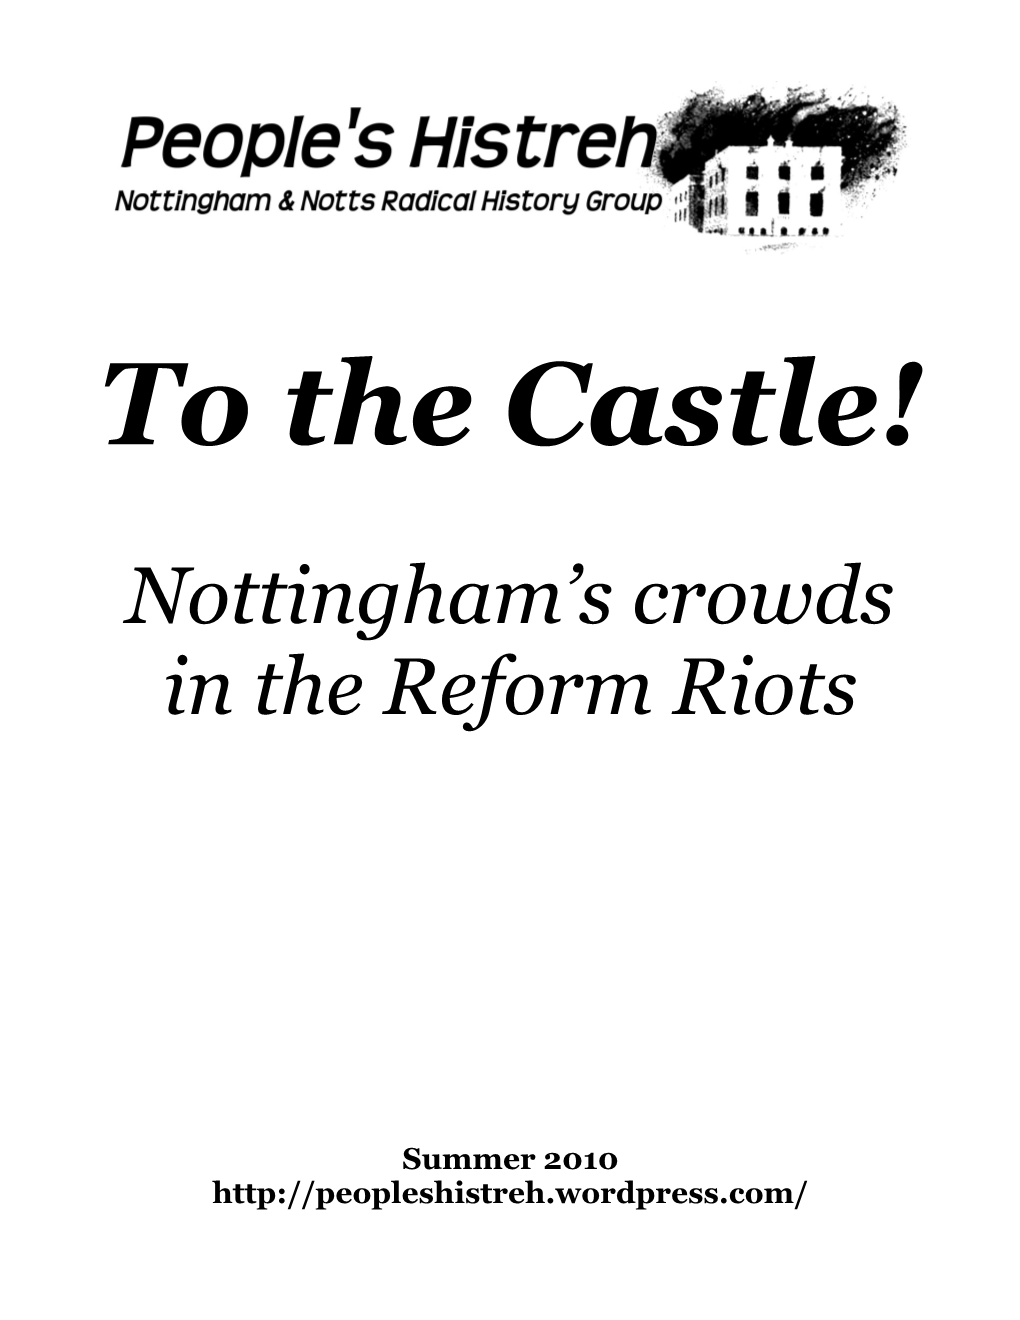 Nottingham's Crowds in the Reform Riots